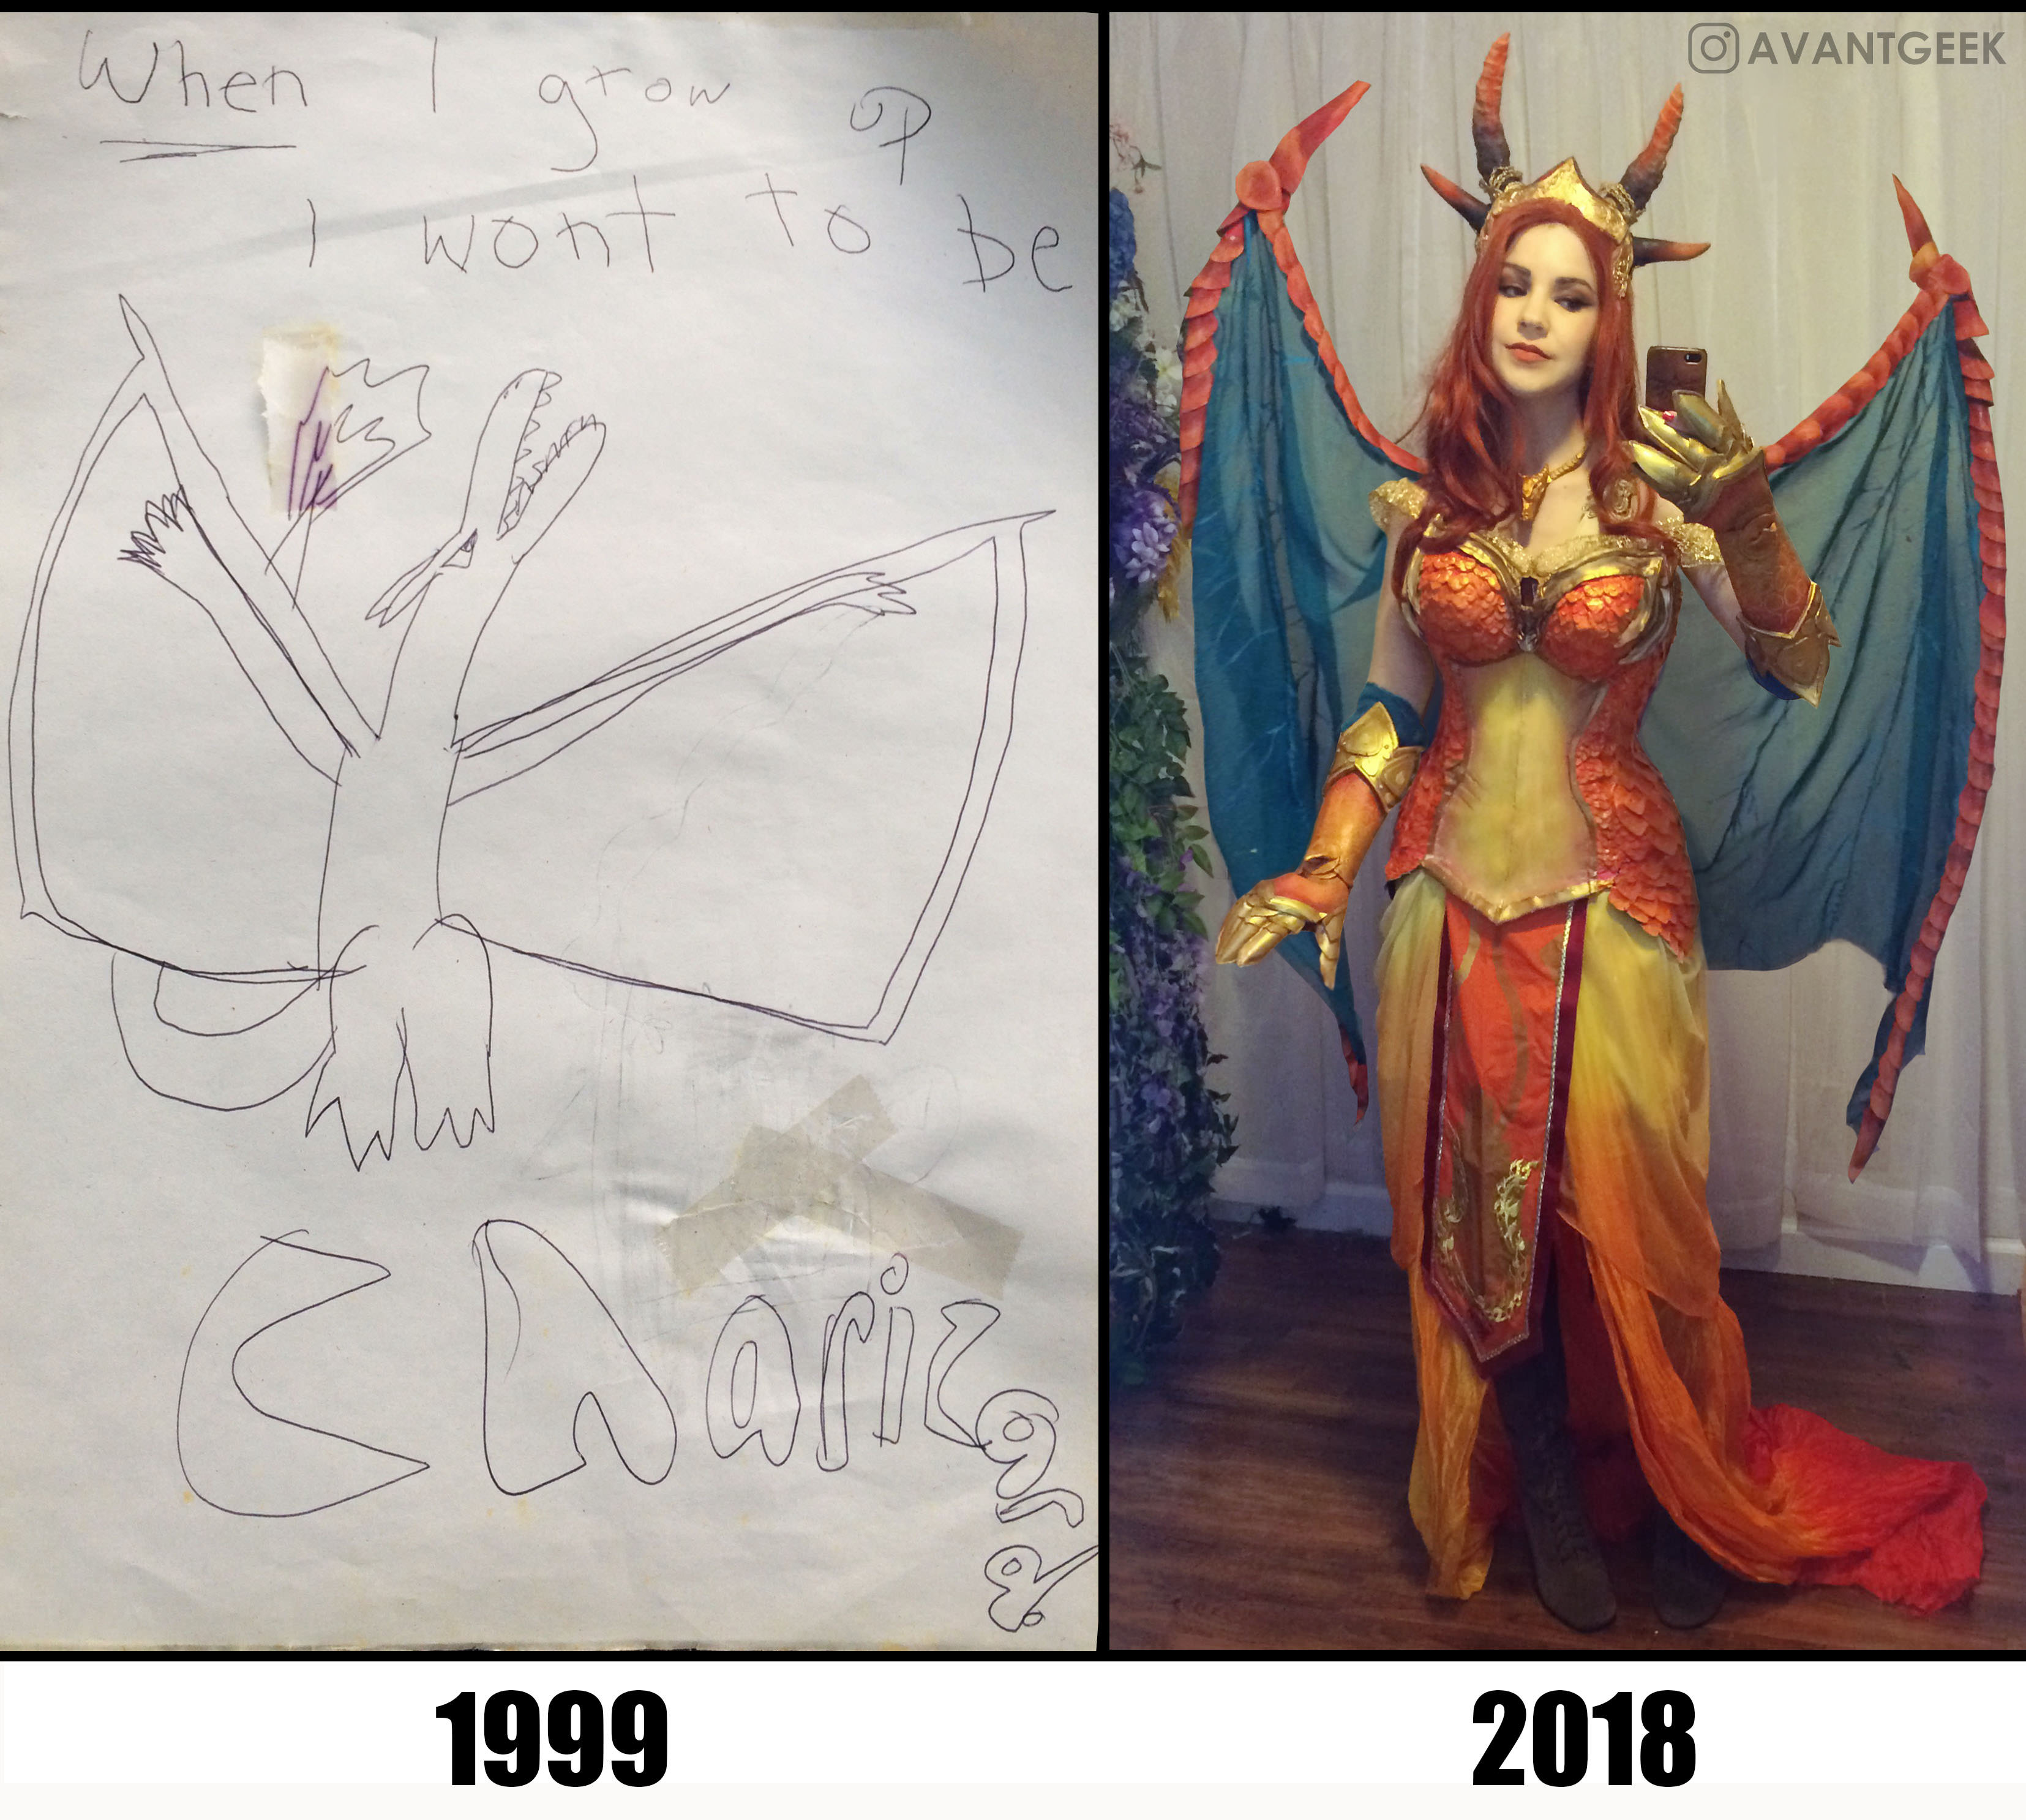 costume design - Avantgeek When I grow P L I wont to be a Oh 1999 2018